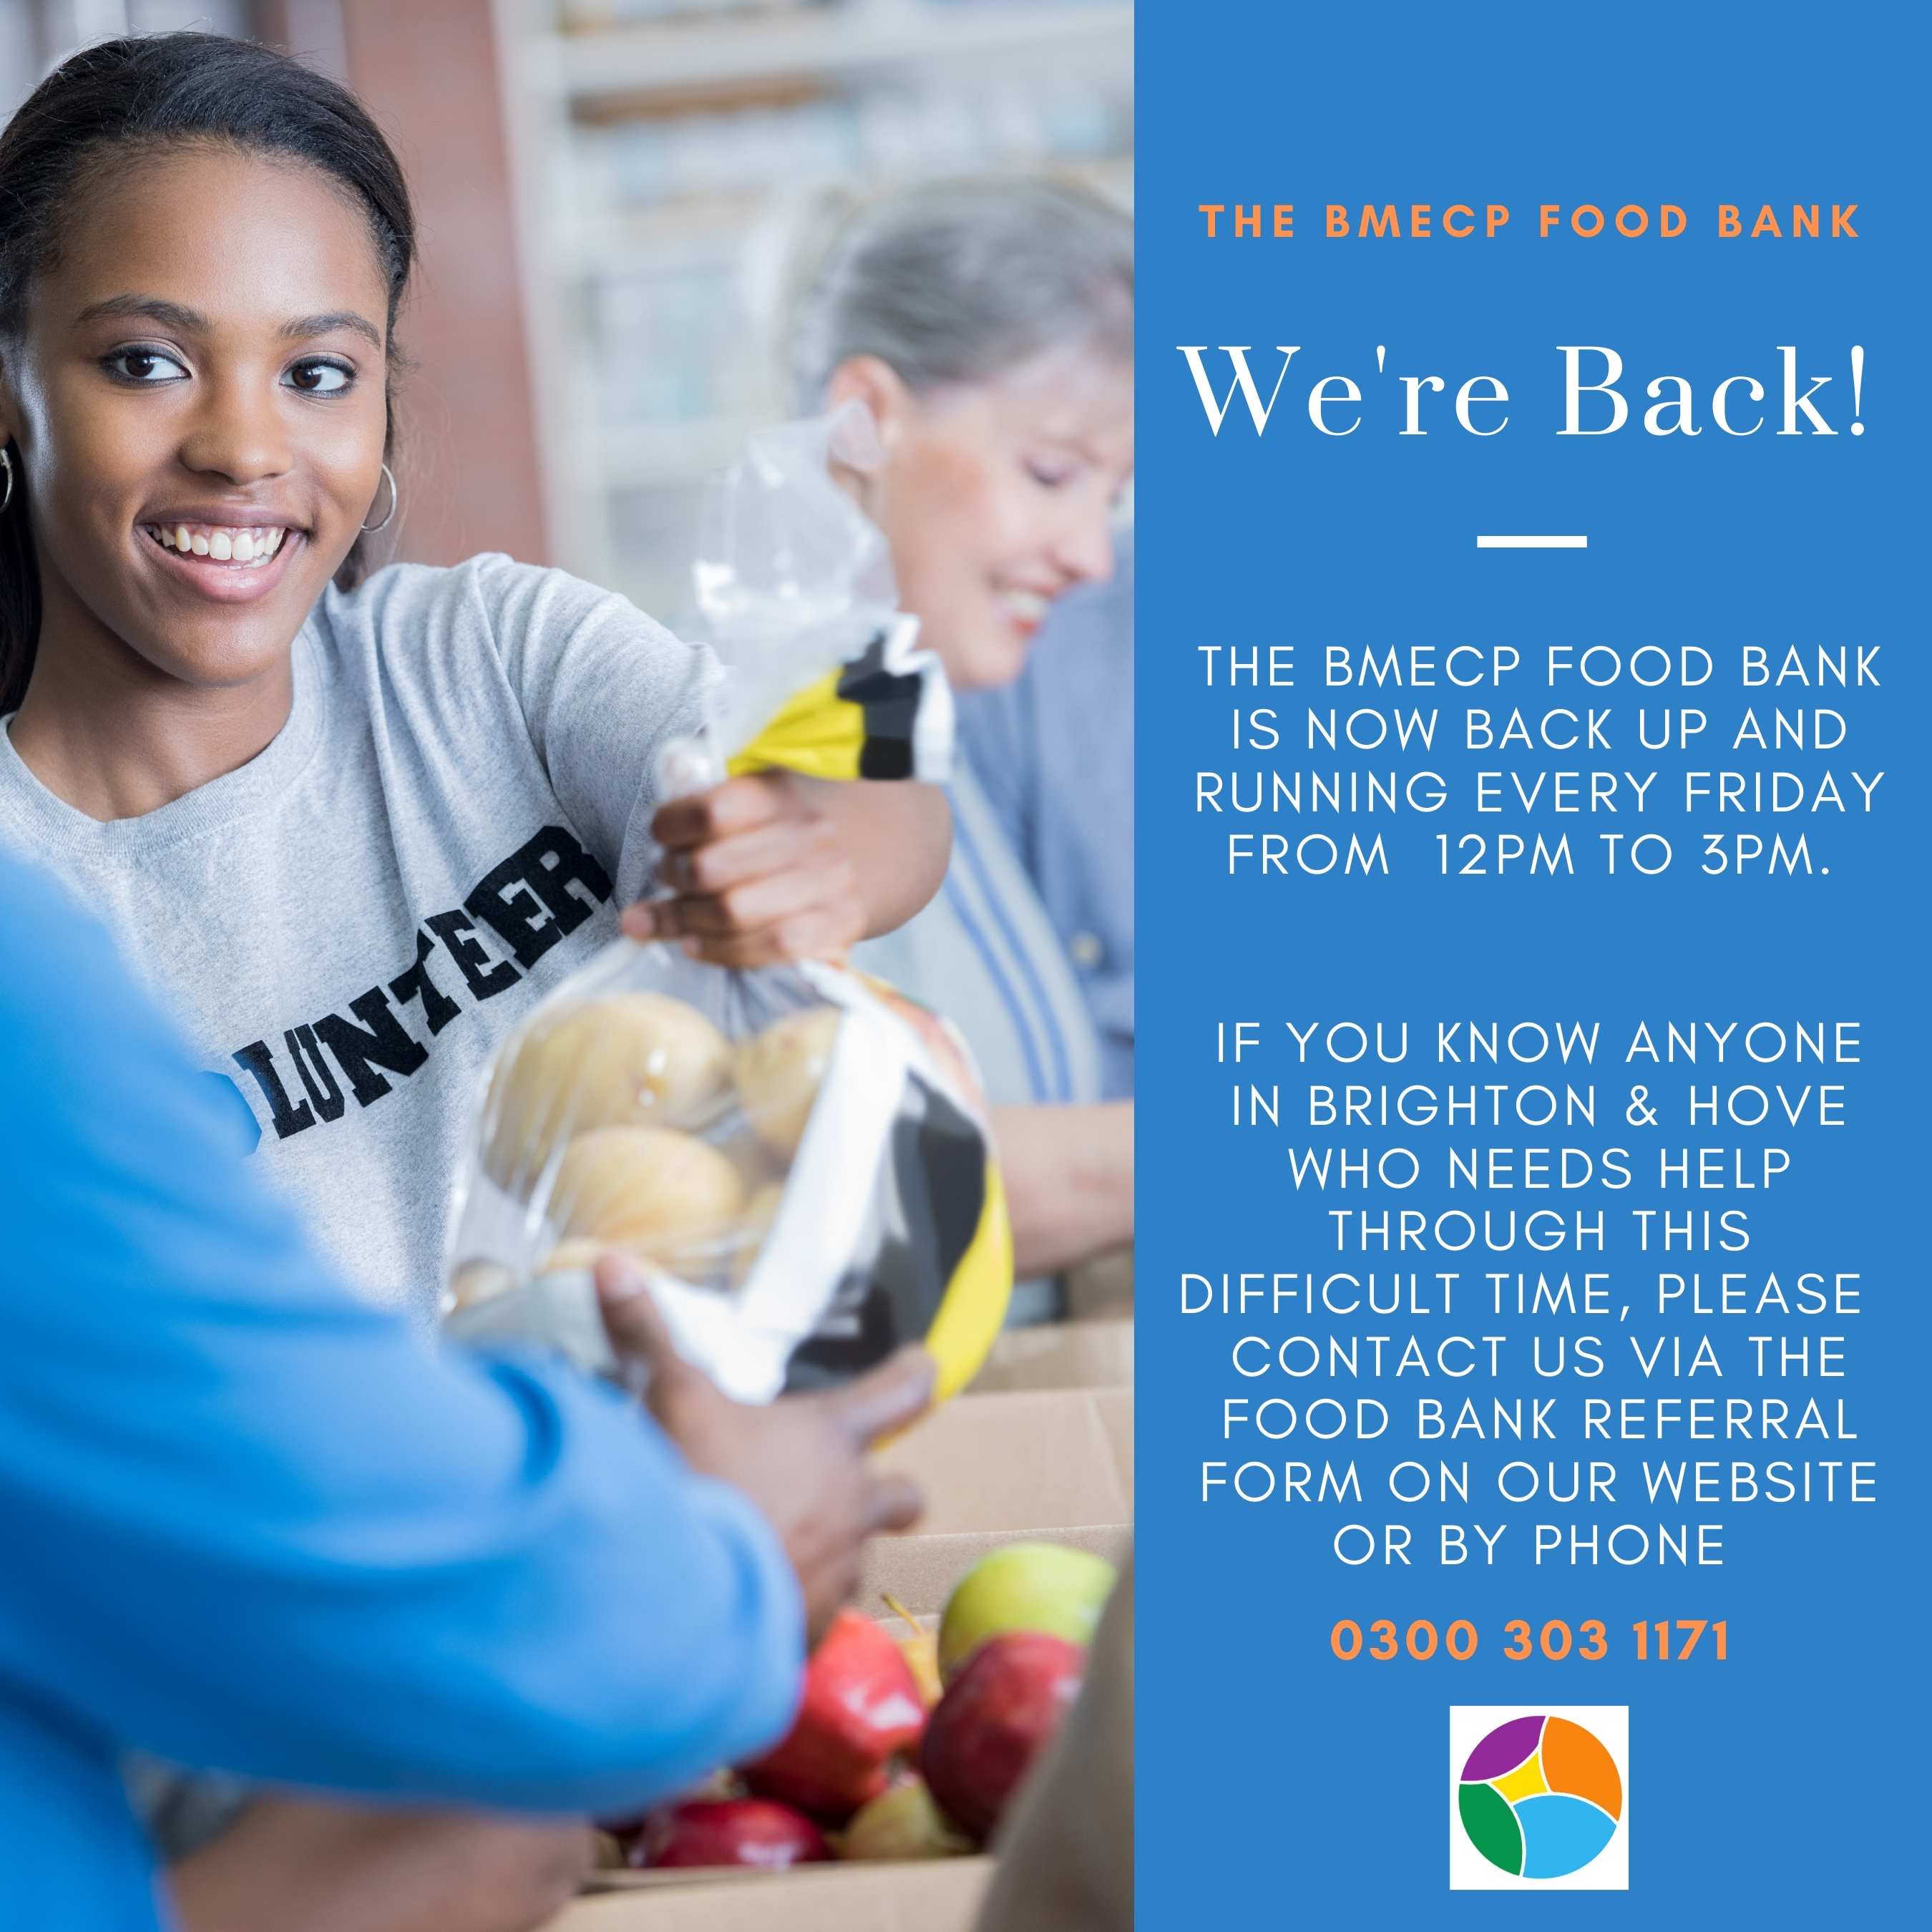 The BMECP Food Bank